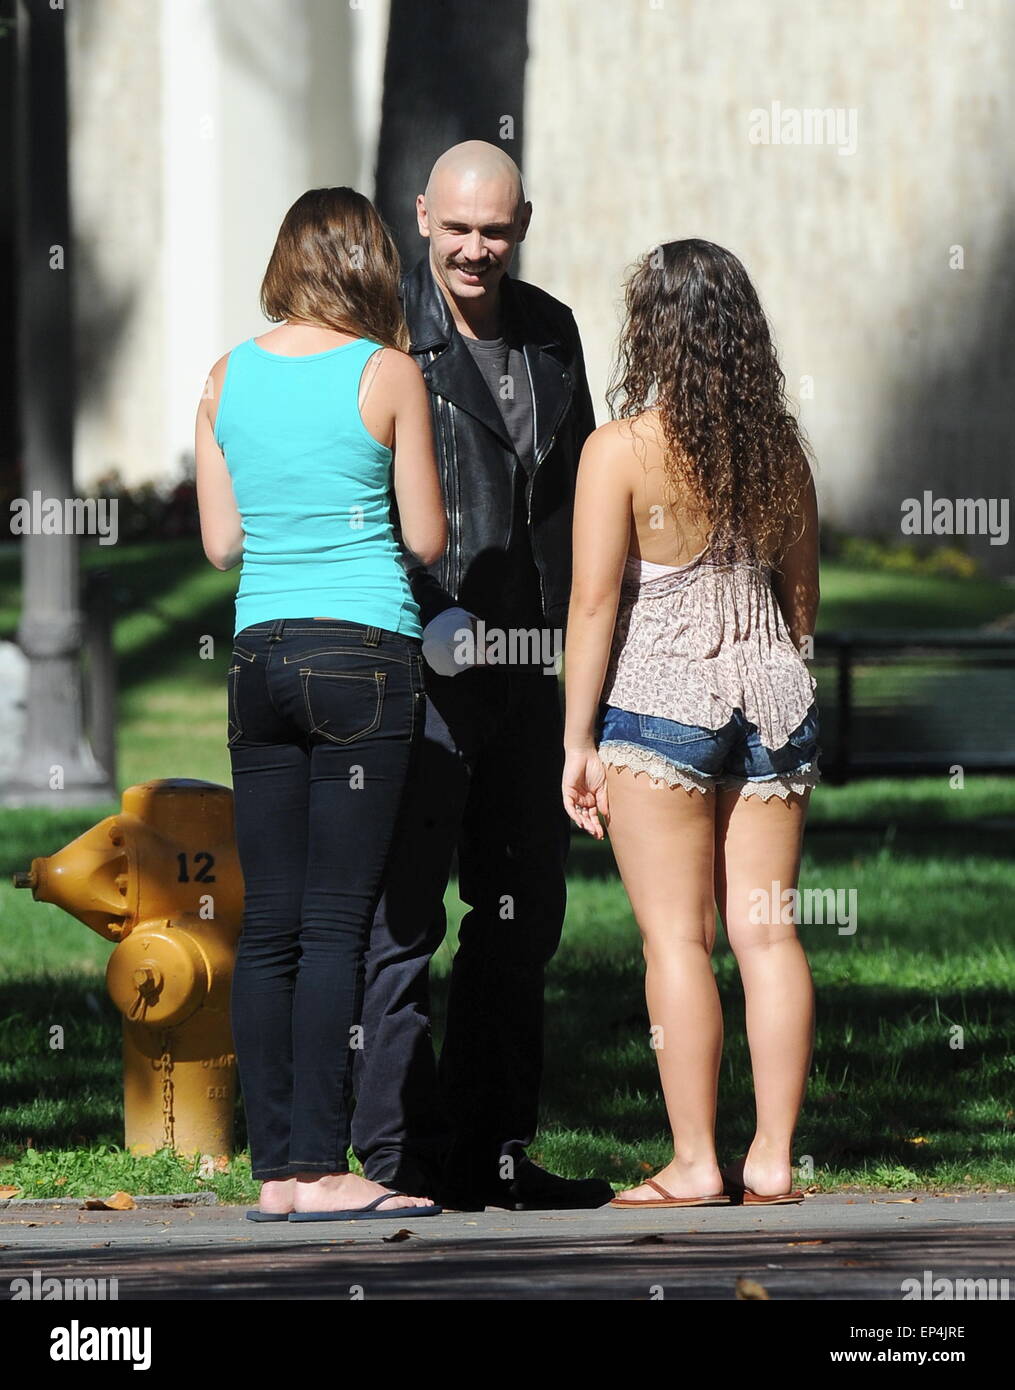 James Franco spotted chatting it up with college students at USC campus during break on the set of 'Zeroville' filming in Los Angeles. The actor was also seen wearing a cast on his hands.  Featuring: James Franco Where: Los Angeles, California, United States When: 09 Nov 2014 Credit: Cousart/JFXimages/WENN.com Stock Photo